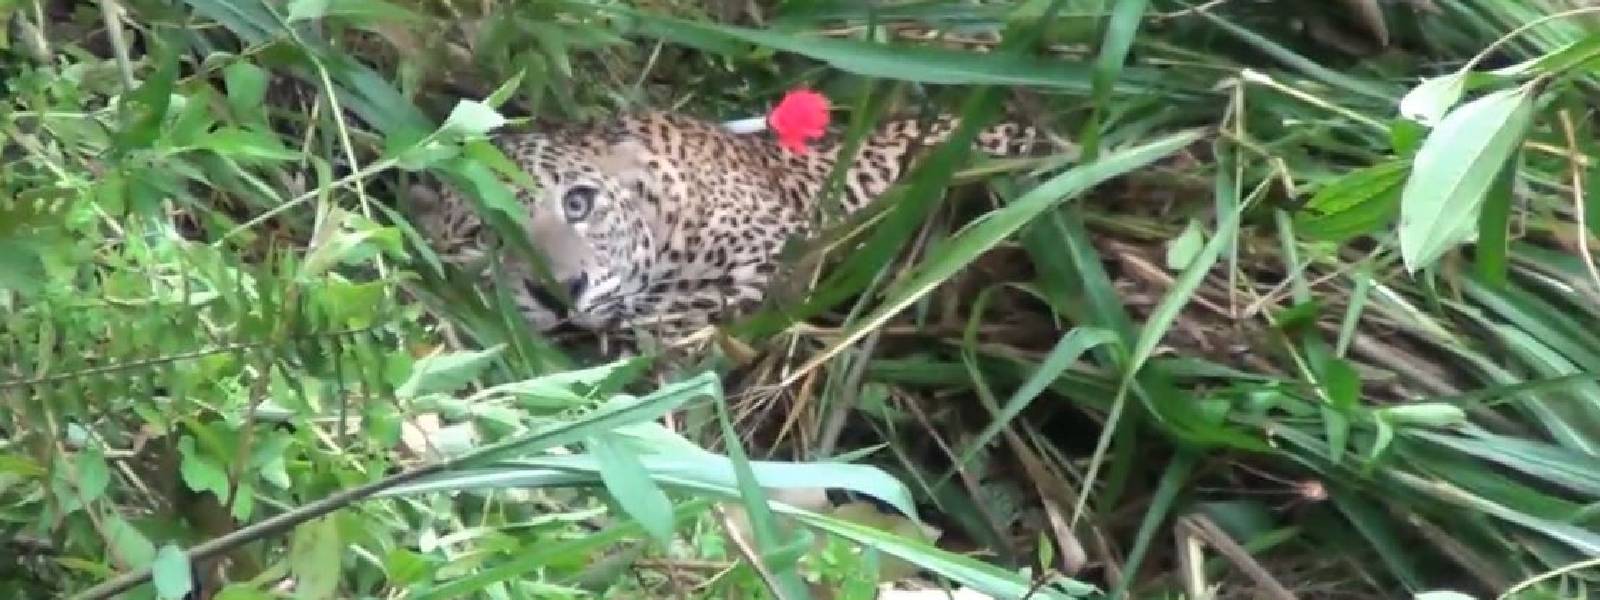 Leopard trapped in a snare in Yatiyanthota